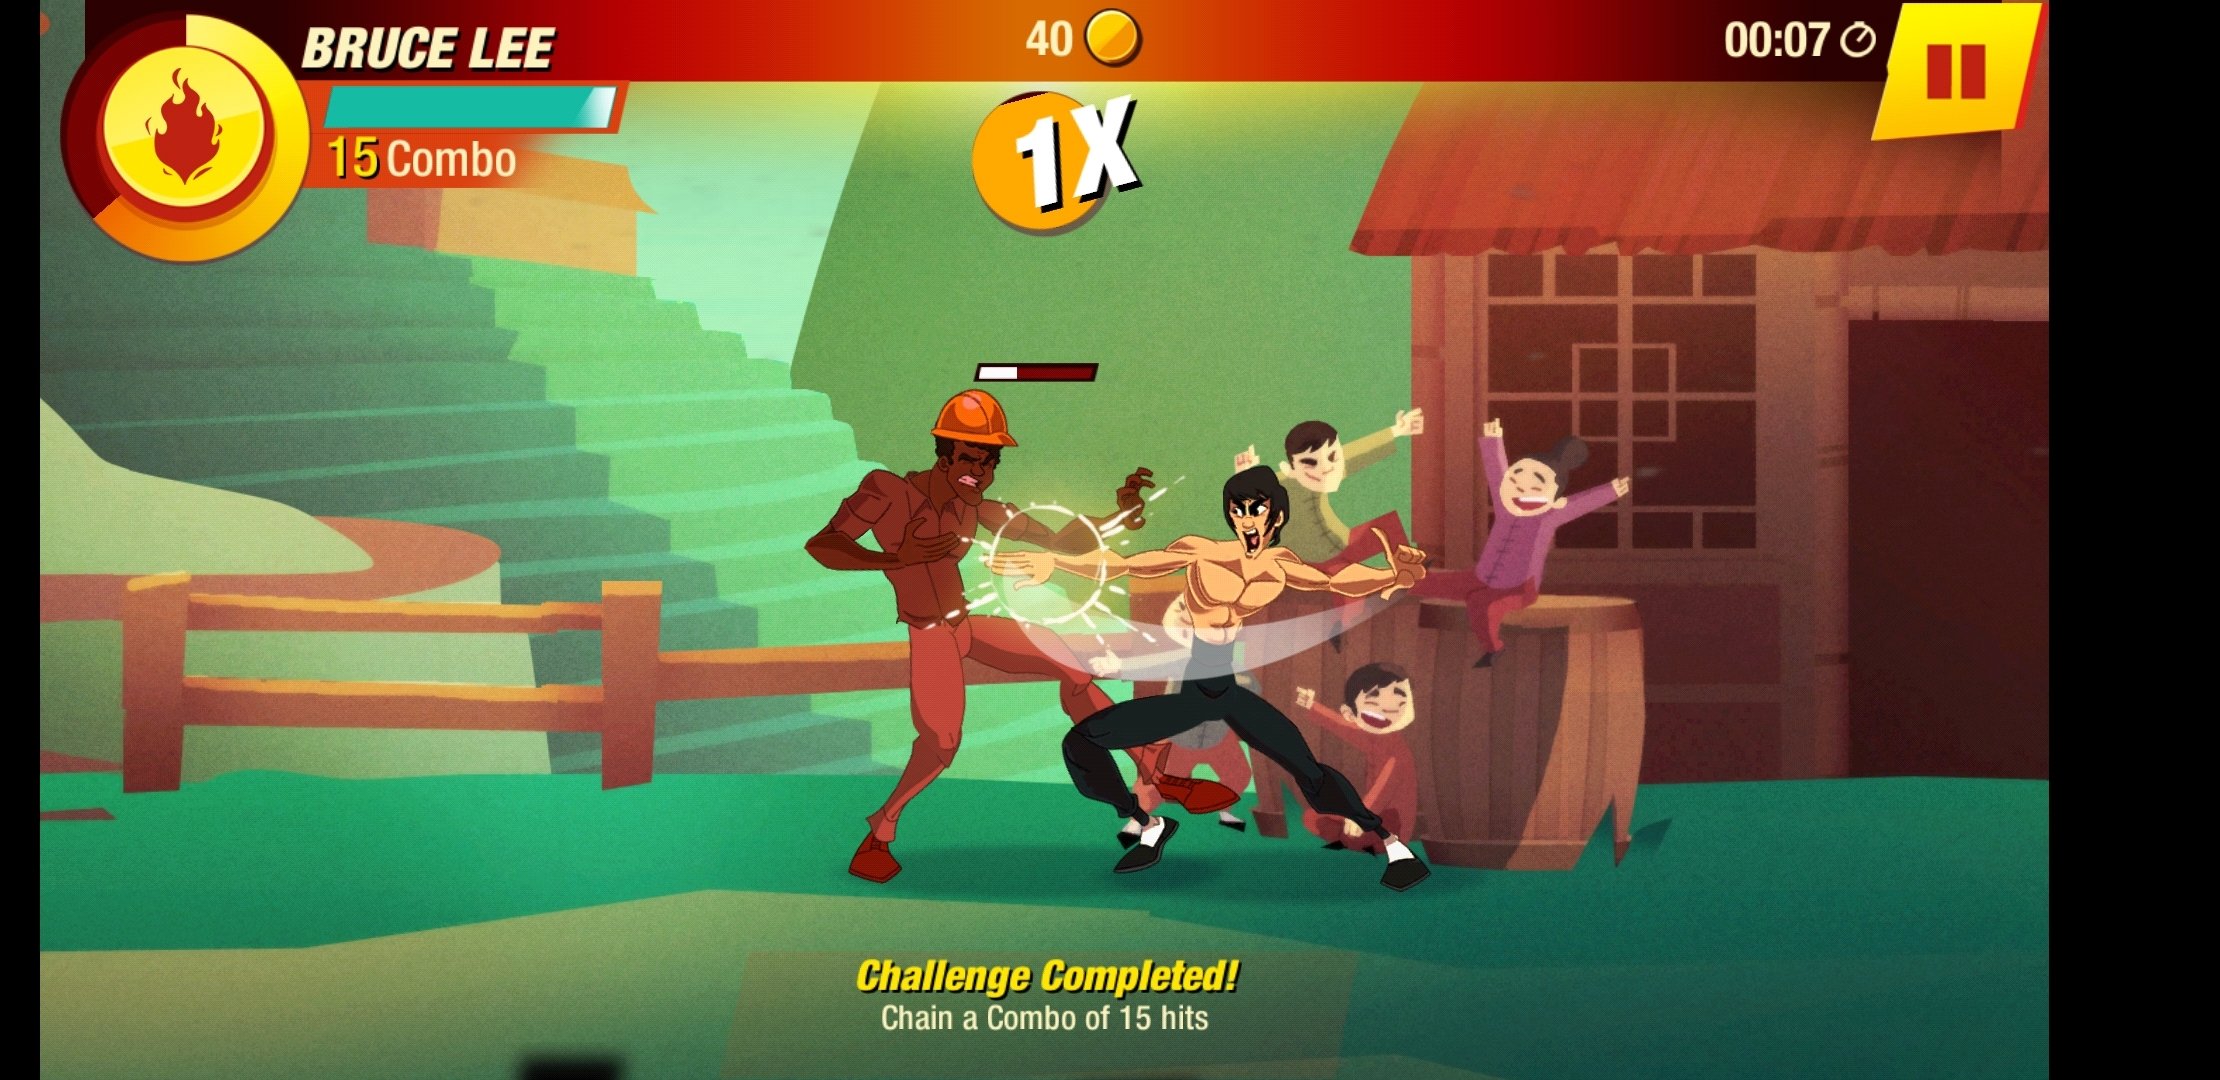 Bruce Lee 1.5.0.6881 - Download for Android APK Free